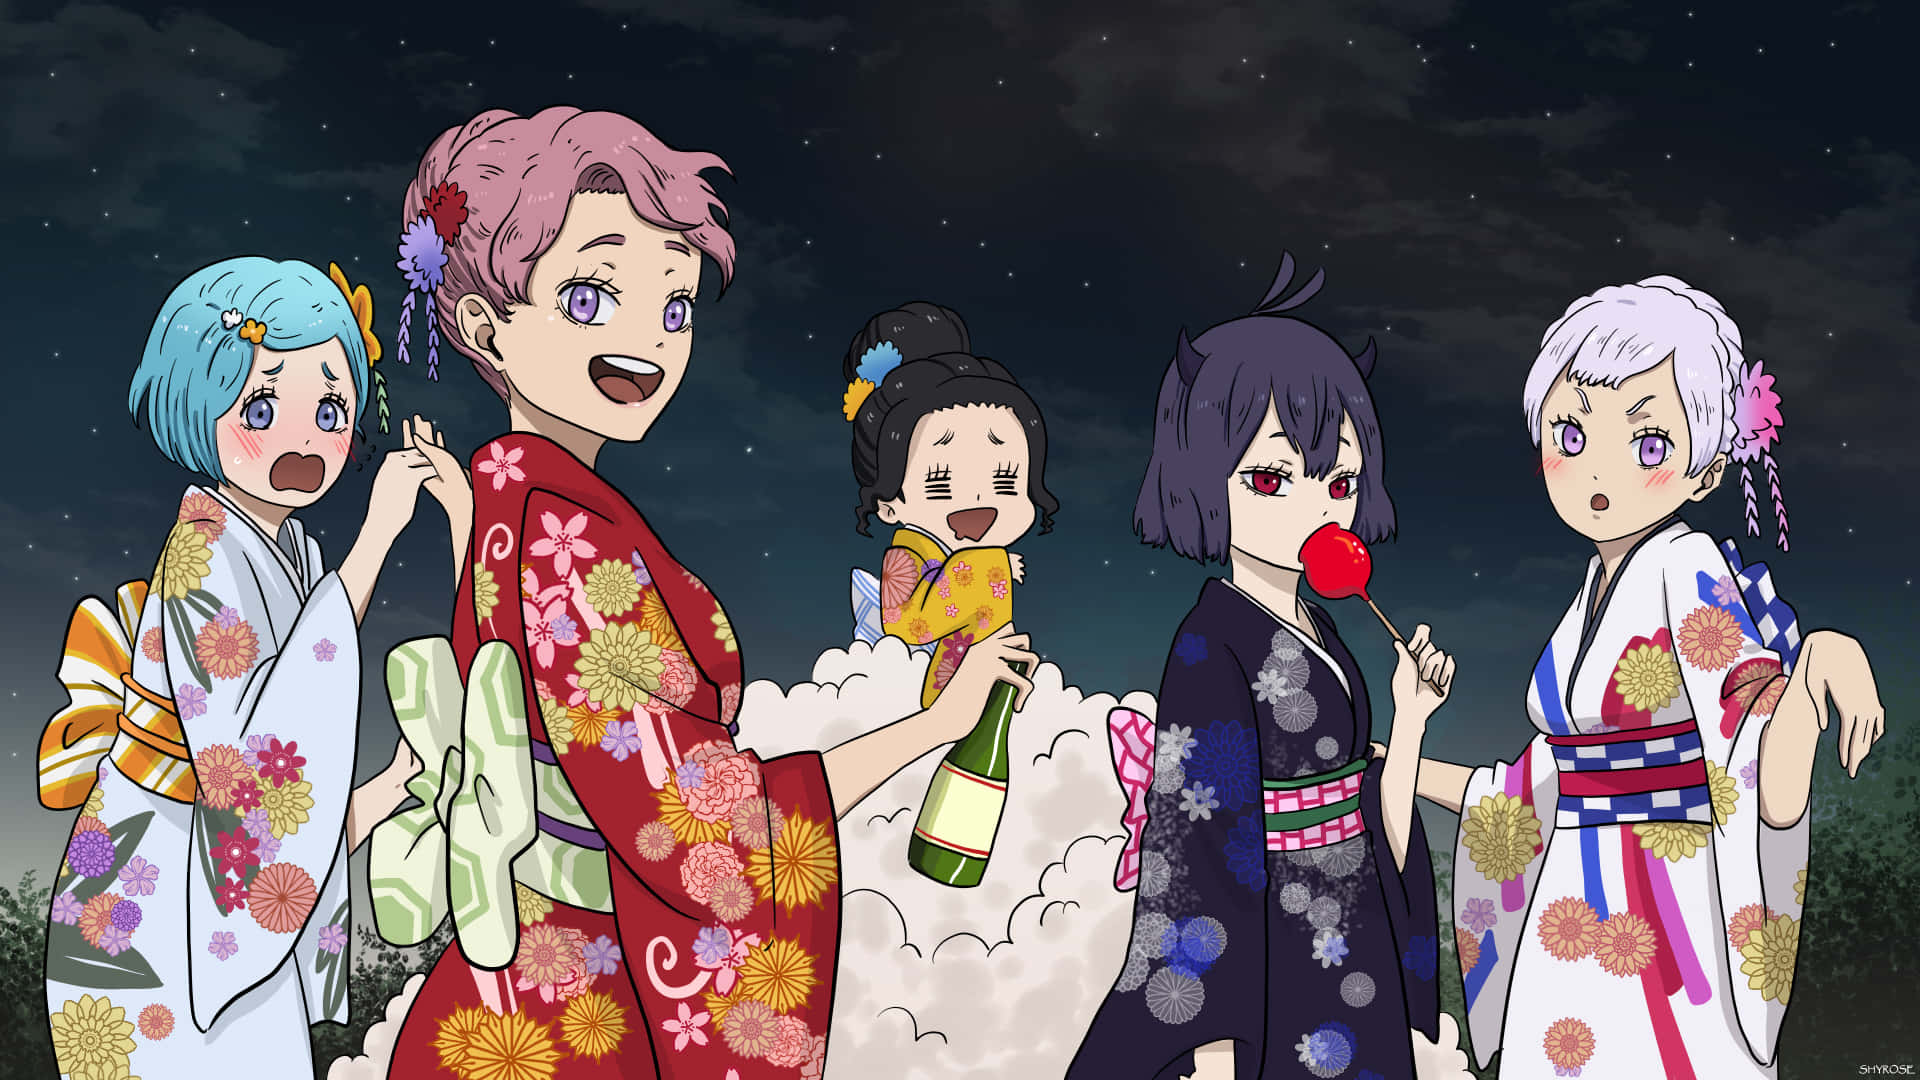 A Group Of Anime Girls In Kimono Standing In The Night Wallpaper